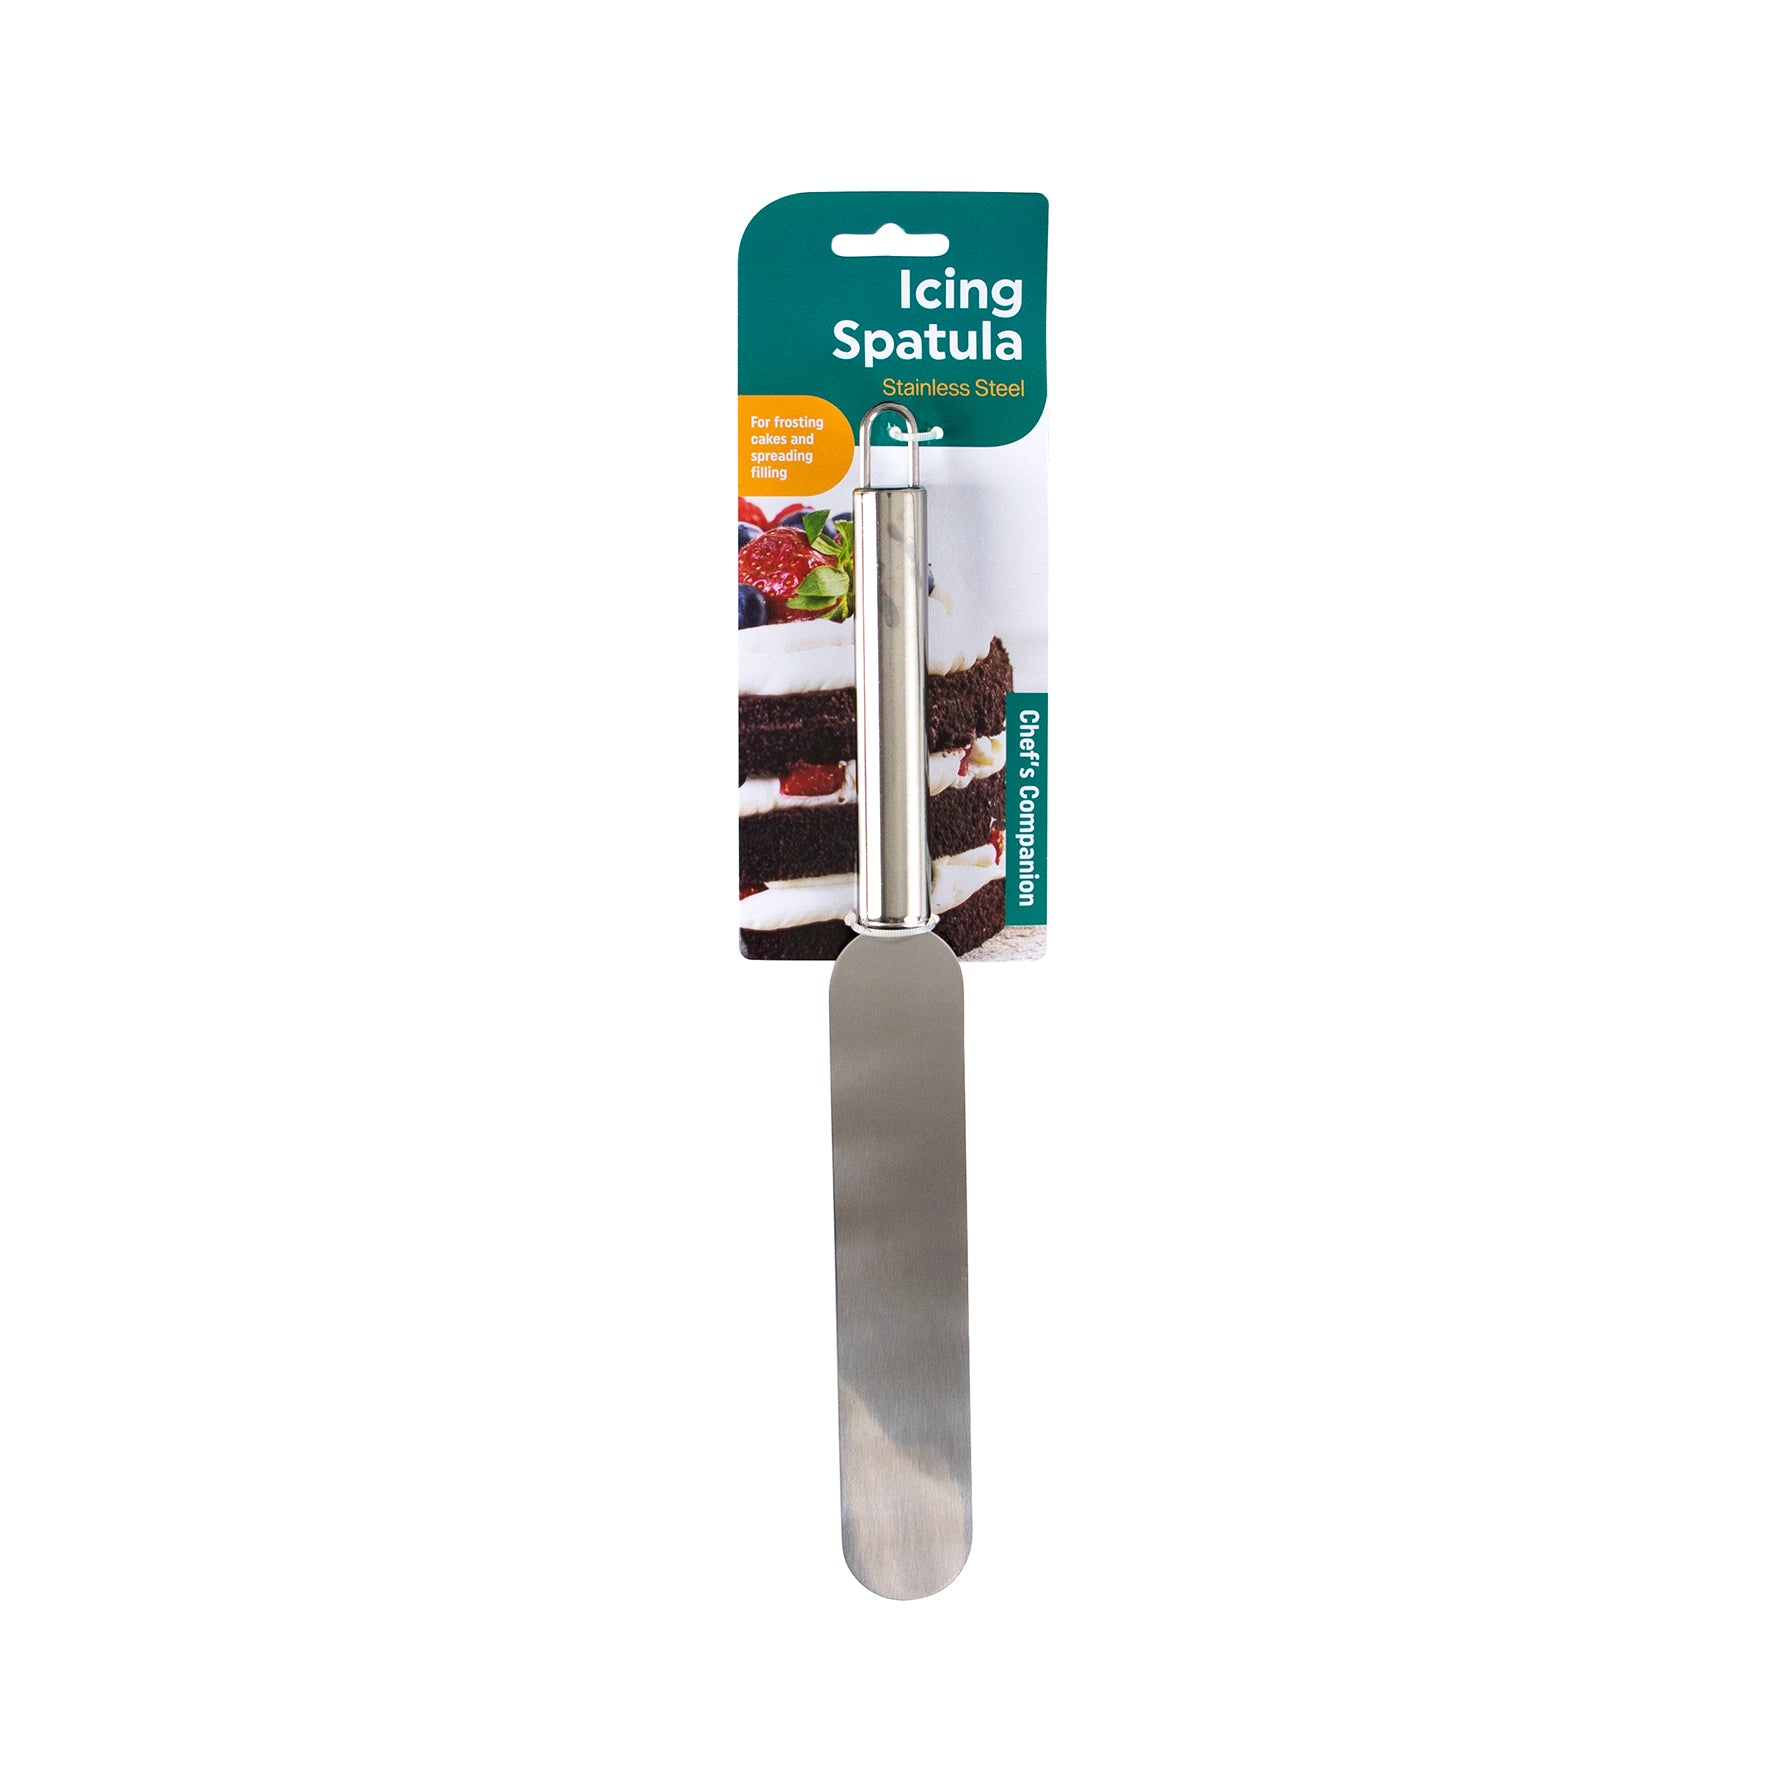 Icing Spatula Stainless Steel - 1 Piece - Dollars and Sense